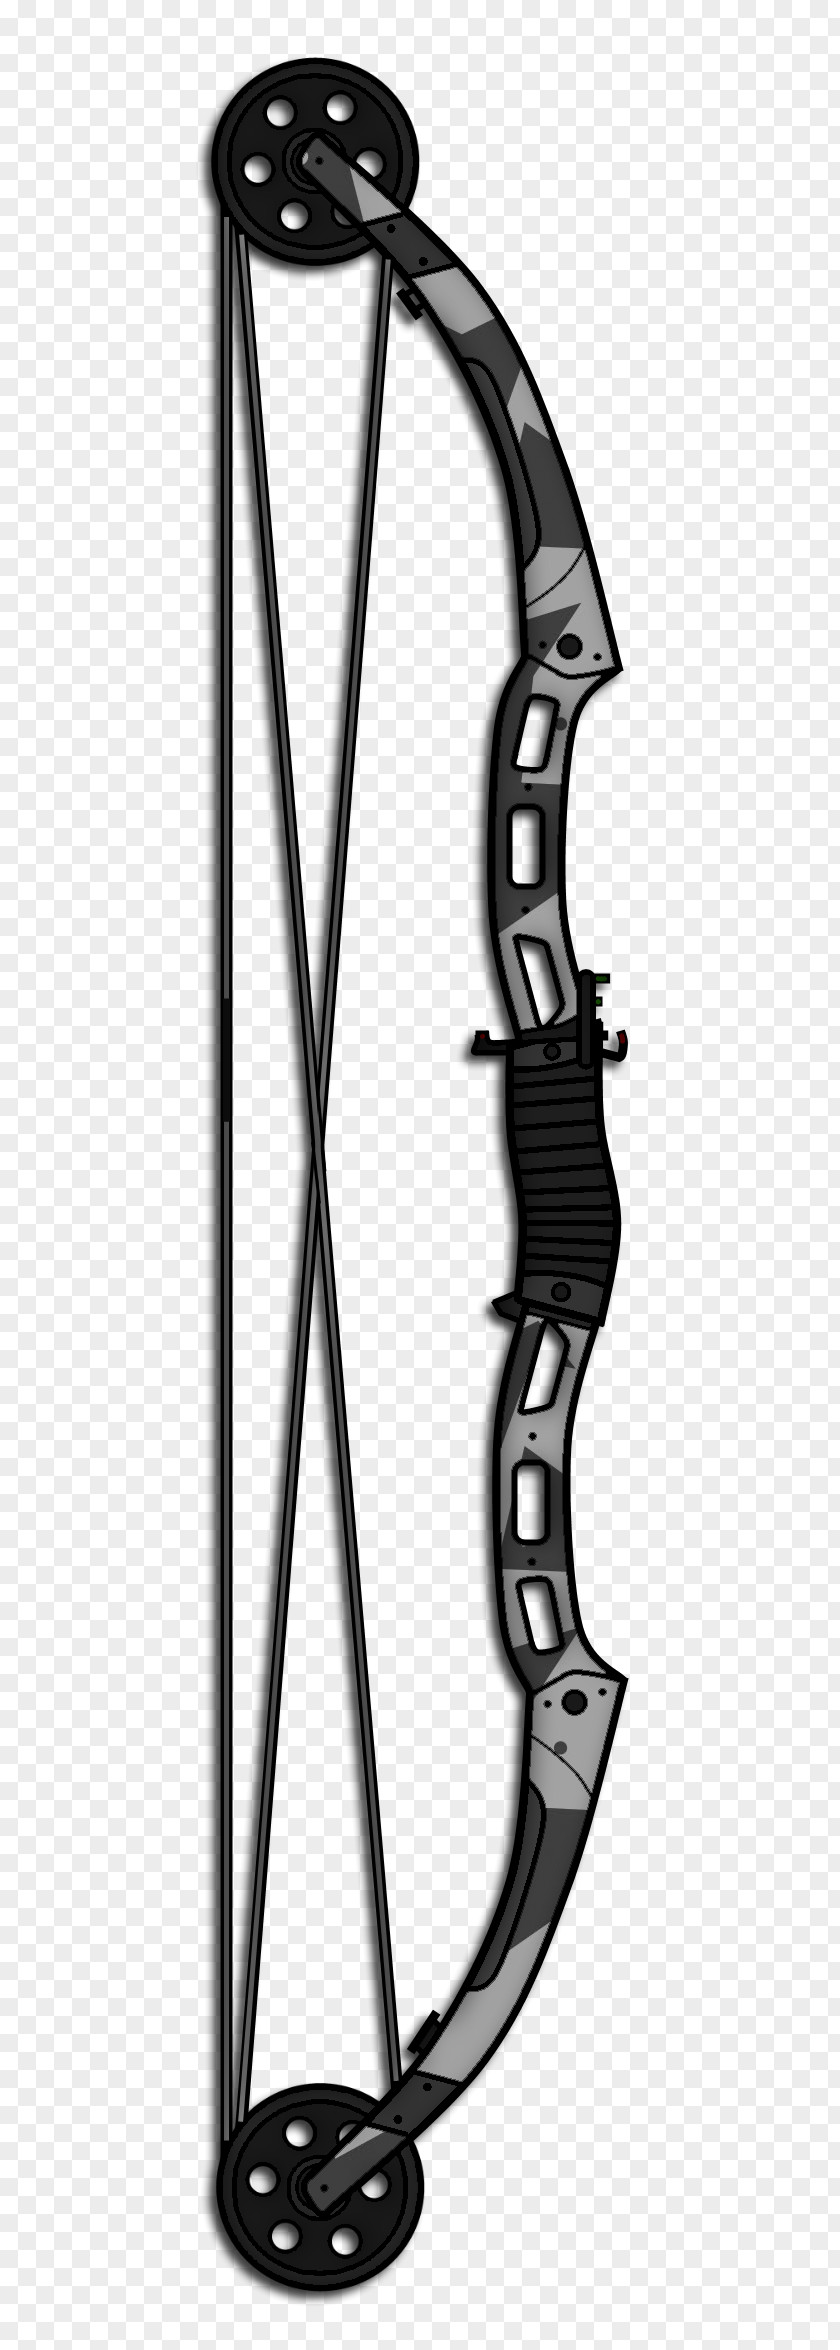 Bow And Arrow Compound Bows Archery Recurve Longbow PNG